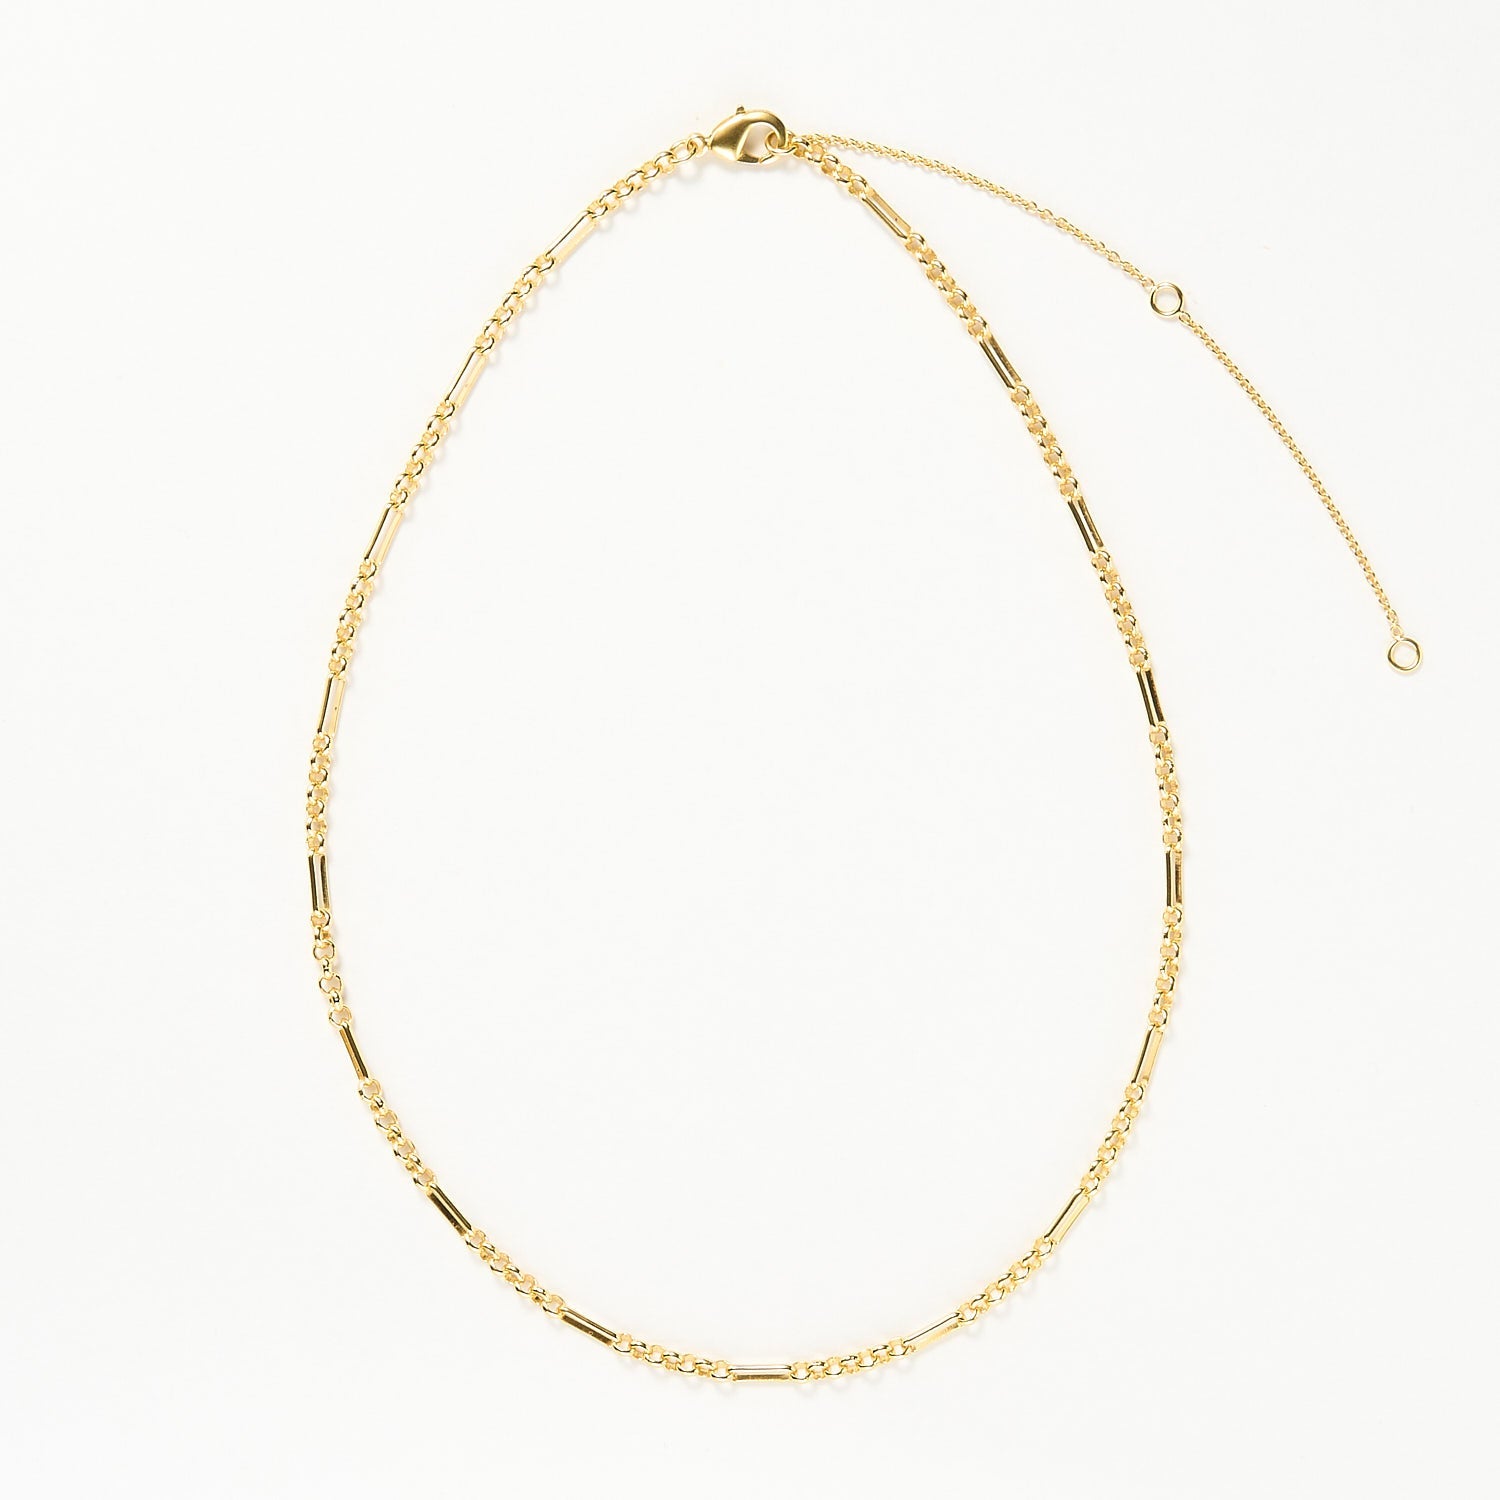 Koh Tao Chain Necklace - Gold 